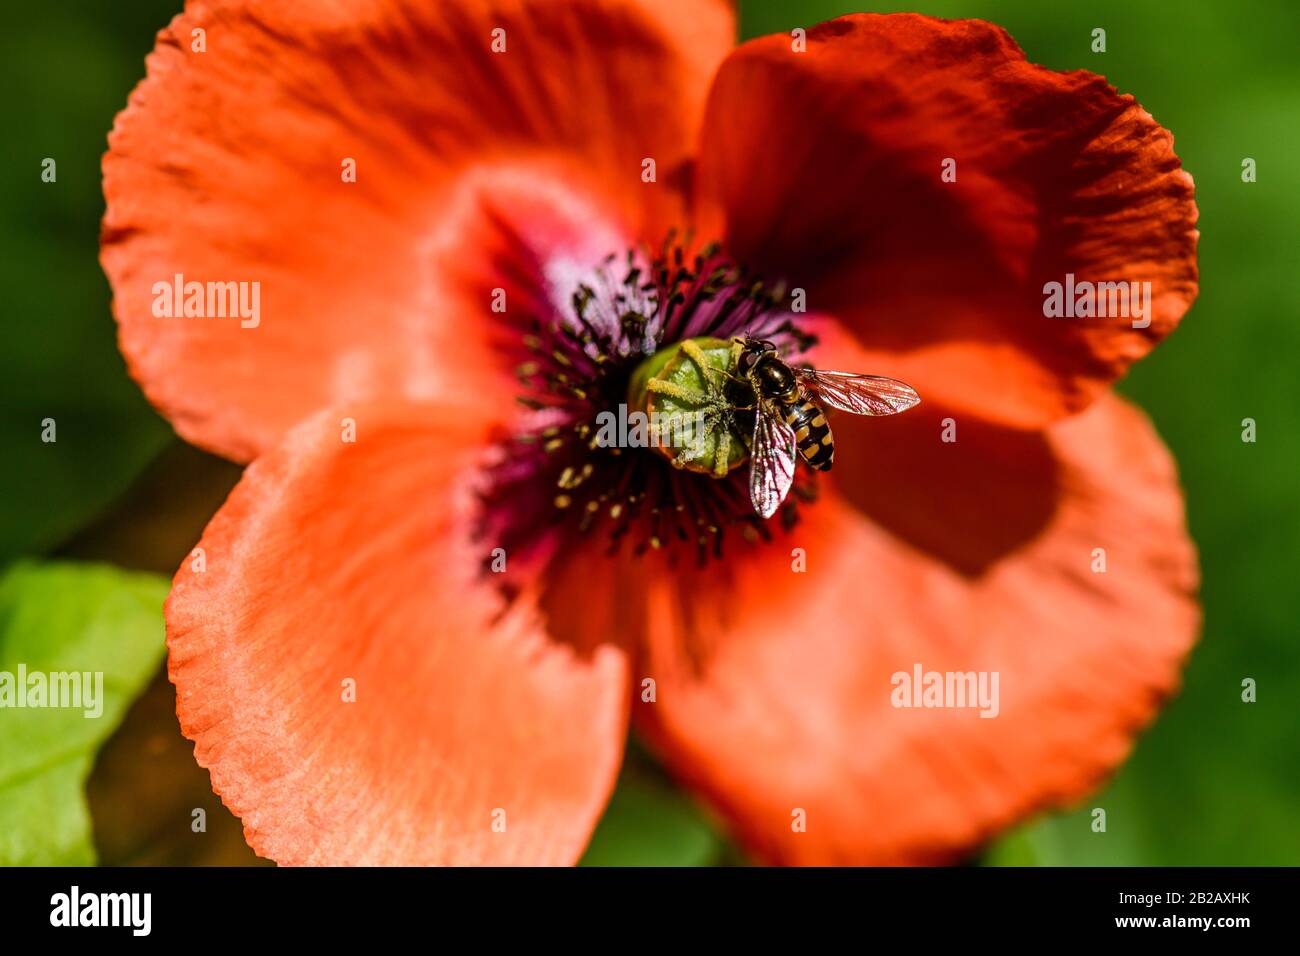 Australian Native Bee  gathers pollen from a flowering red poppy Stock Photo